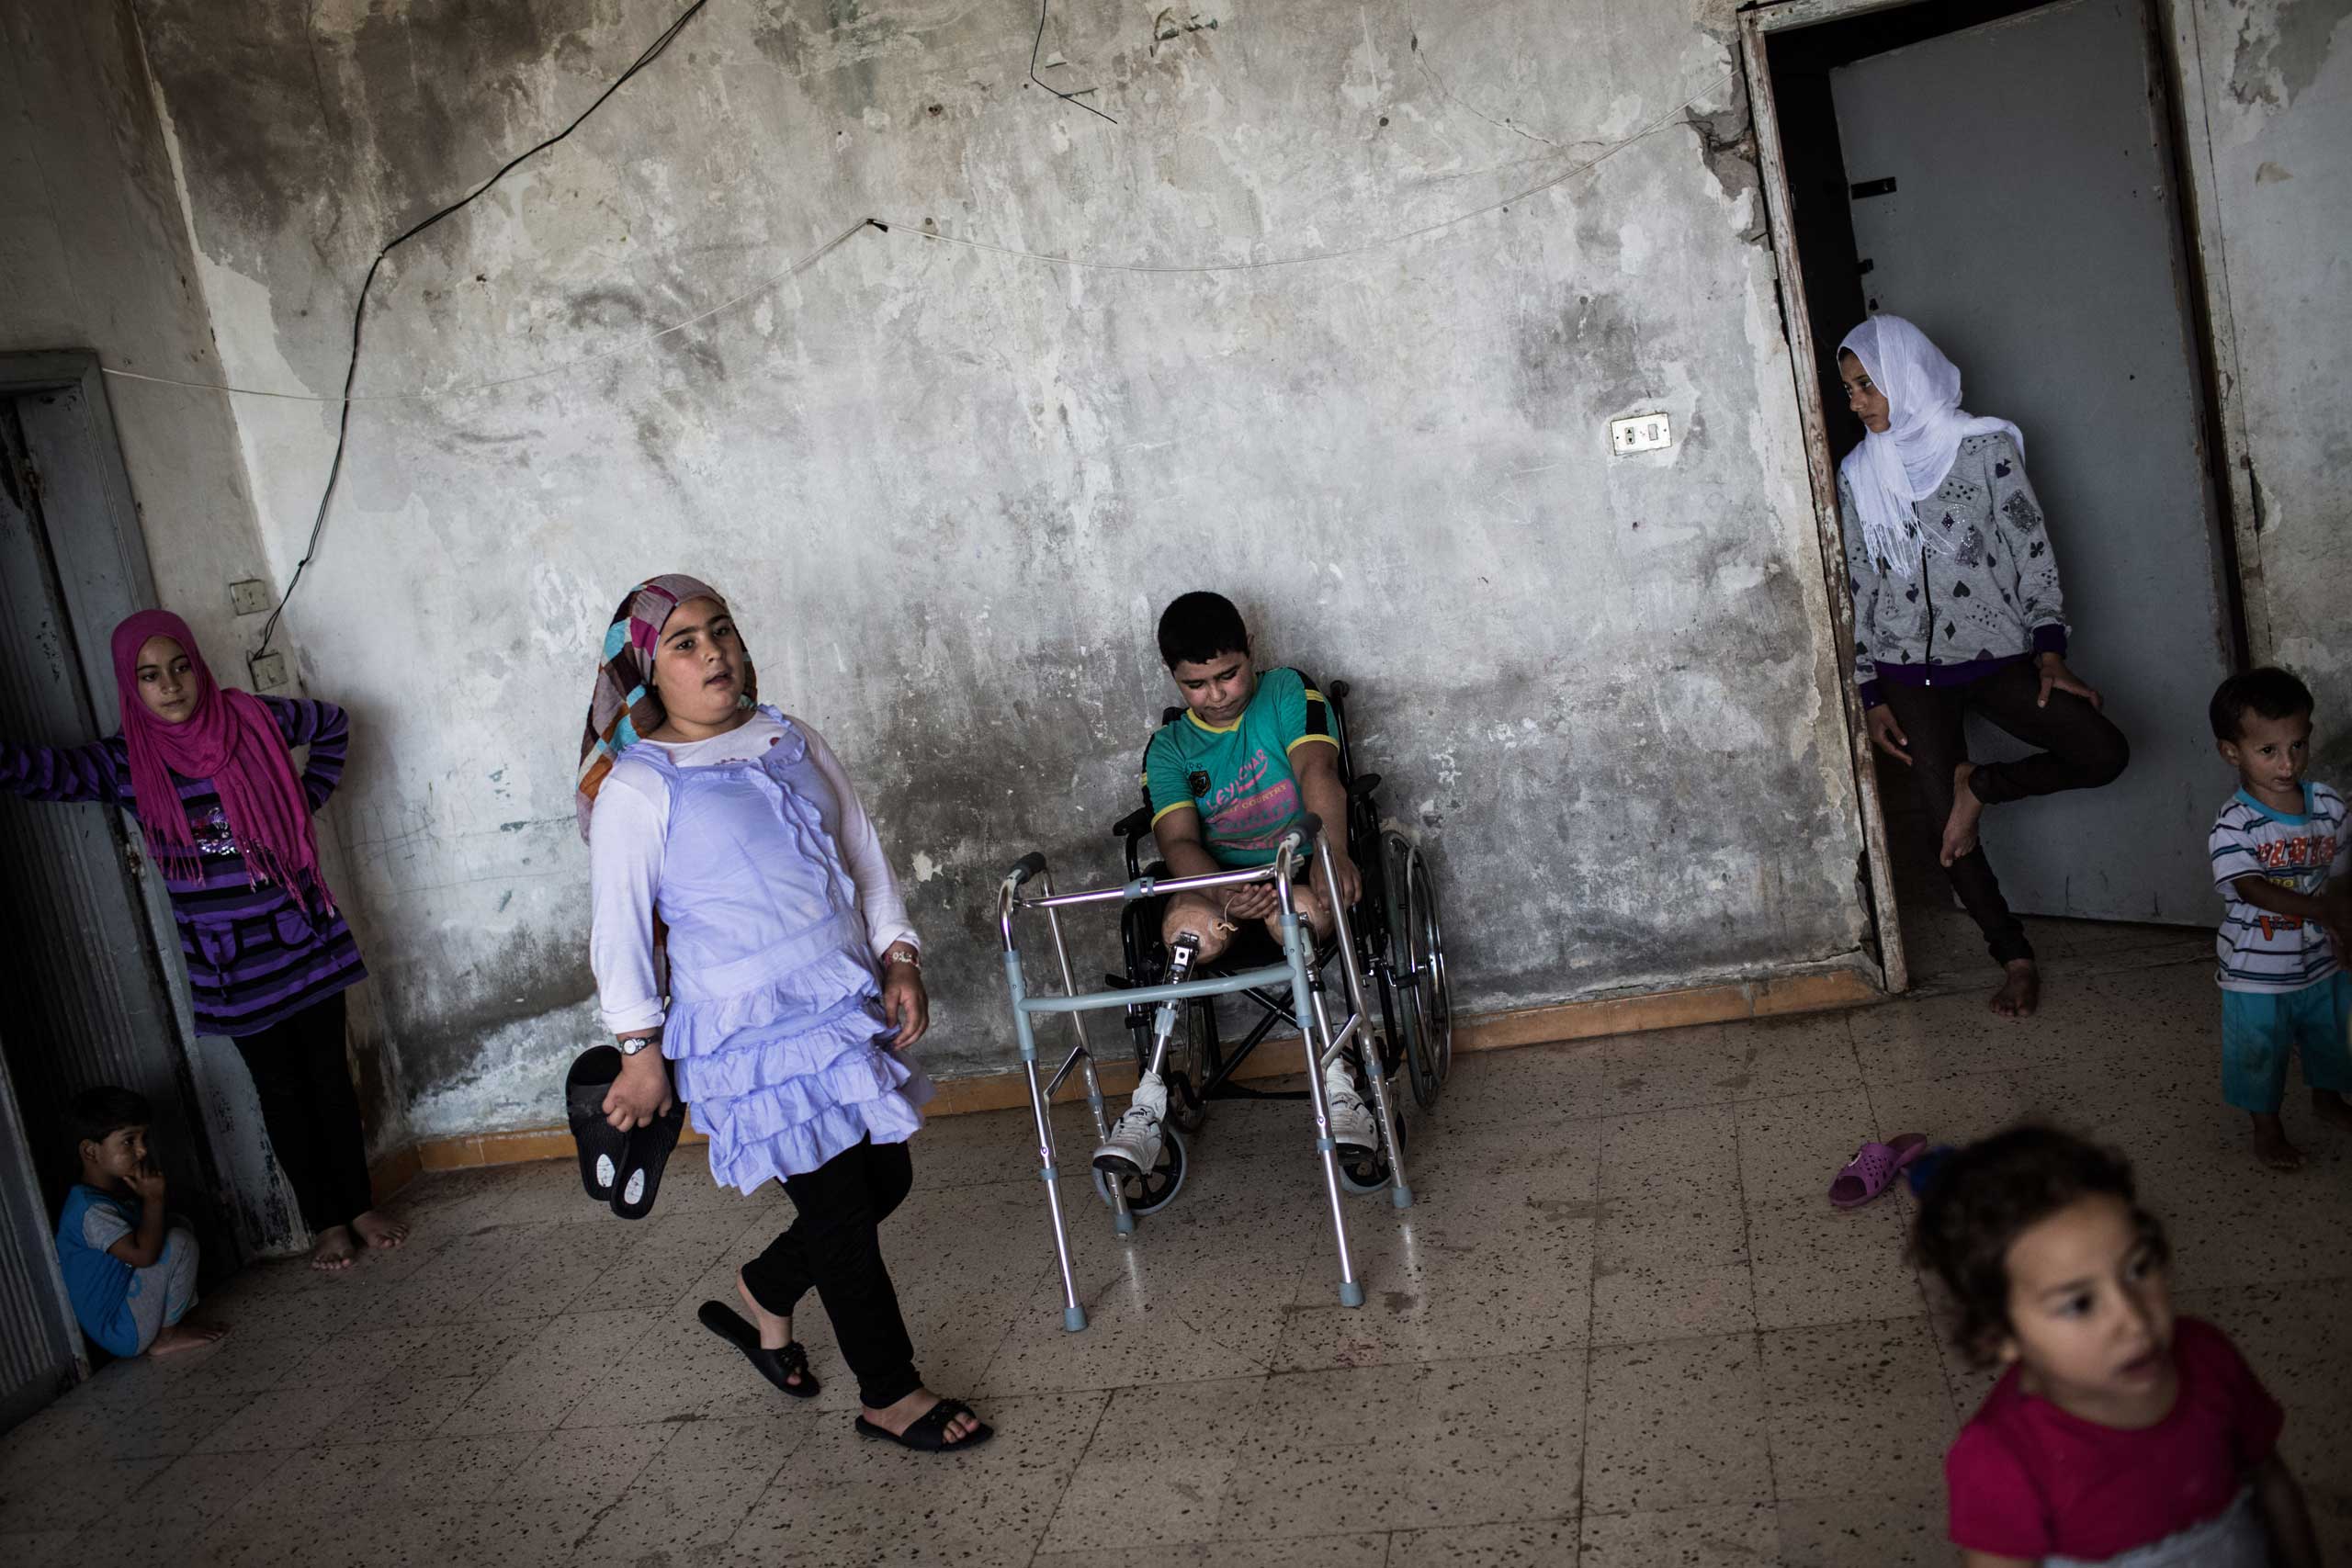 Hussein, 10, sits at a shelter in Tripoli, Lebanon, June 18, 2014. He was presumed dead after a bomb hit his home in Syria but found unconscious at the morgue. Hussein is learning to walk again after receiving two prosthetic legs.